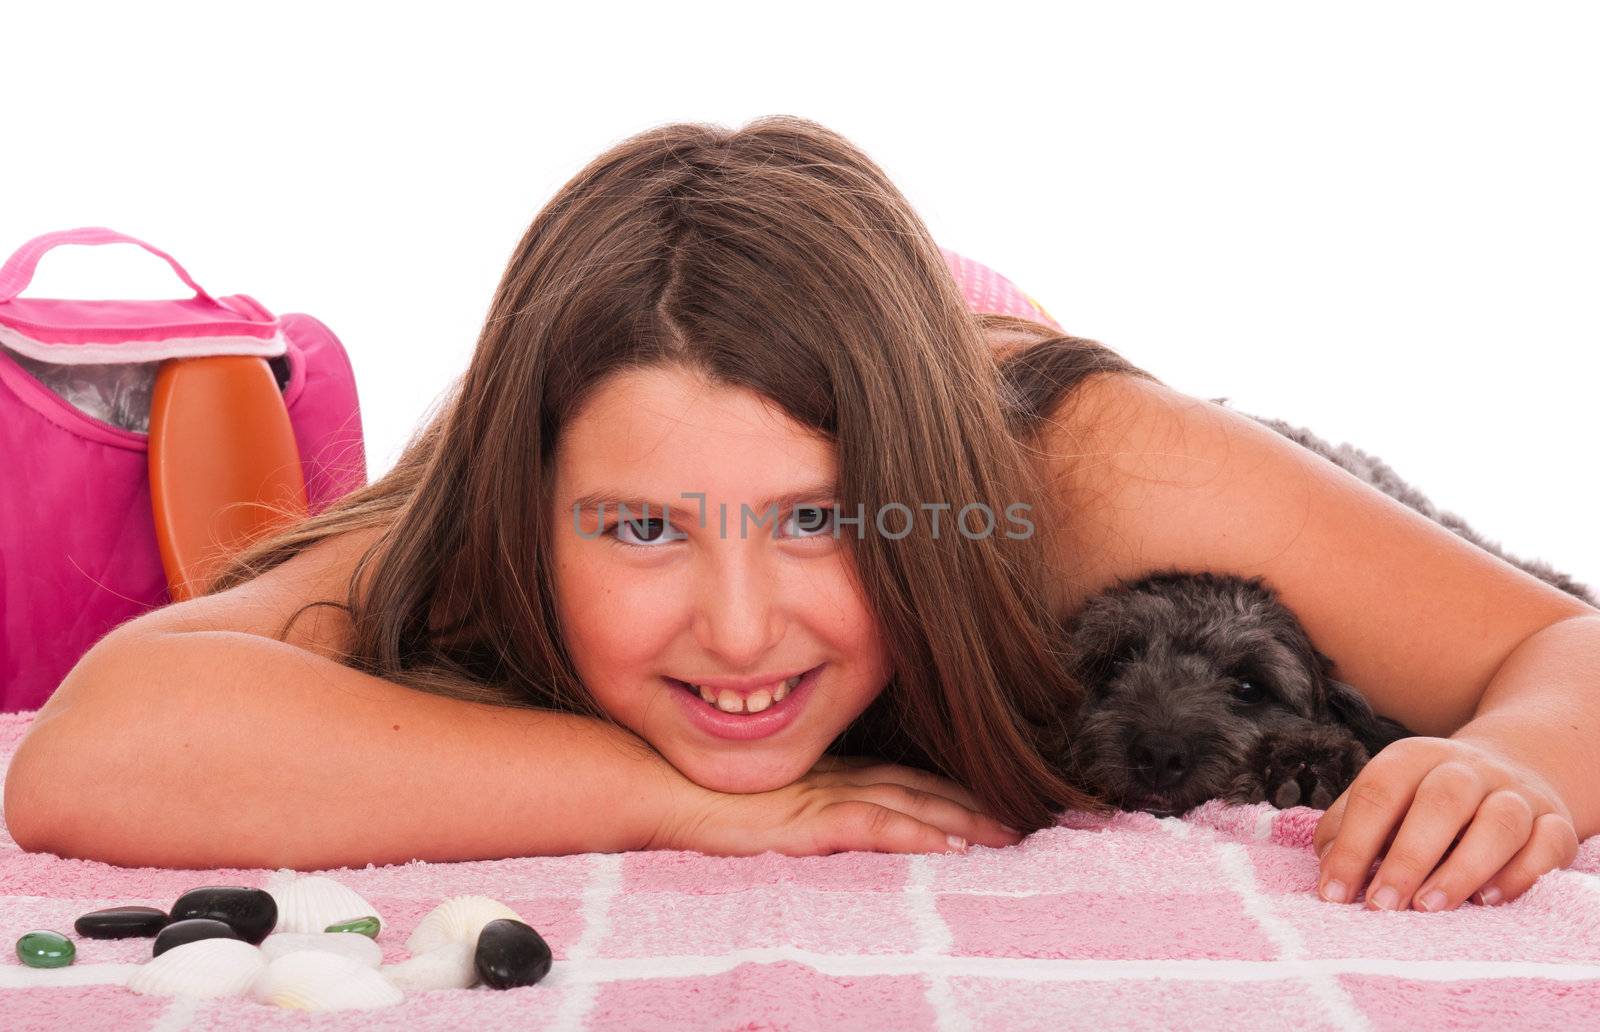 smiling brunette teenage girl in swimsuit at the beach with her shipoo dog (studio setting with beach and personal items) isolated on white background